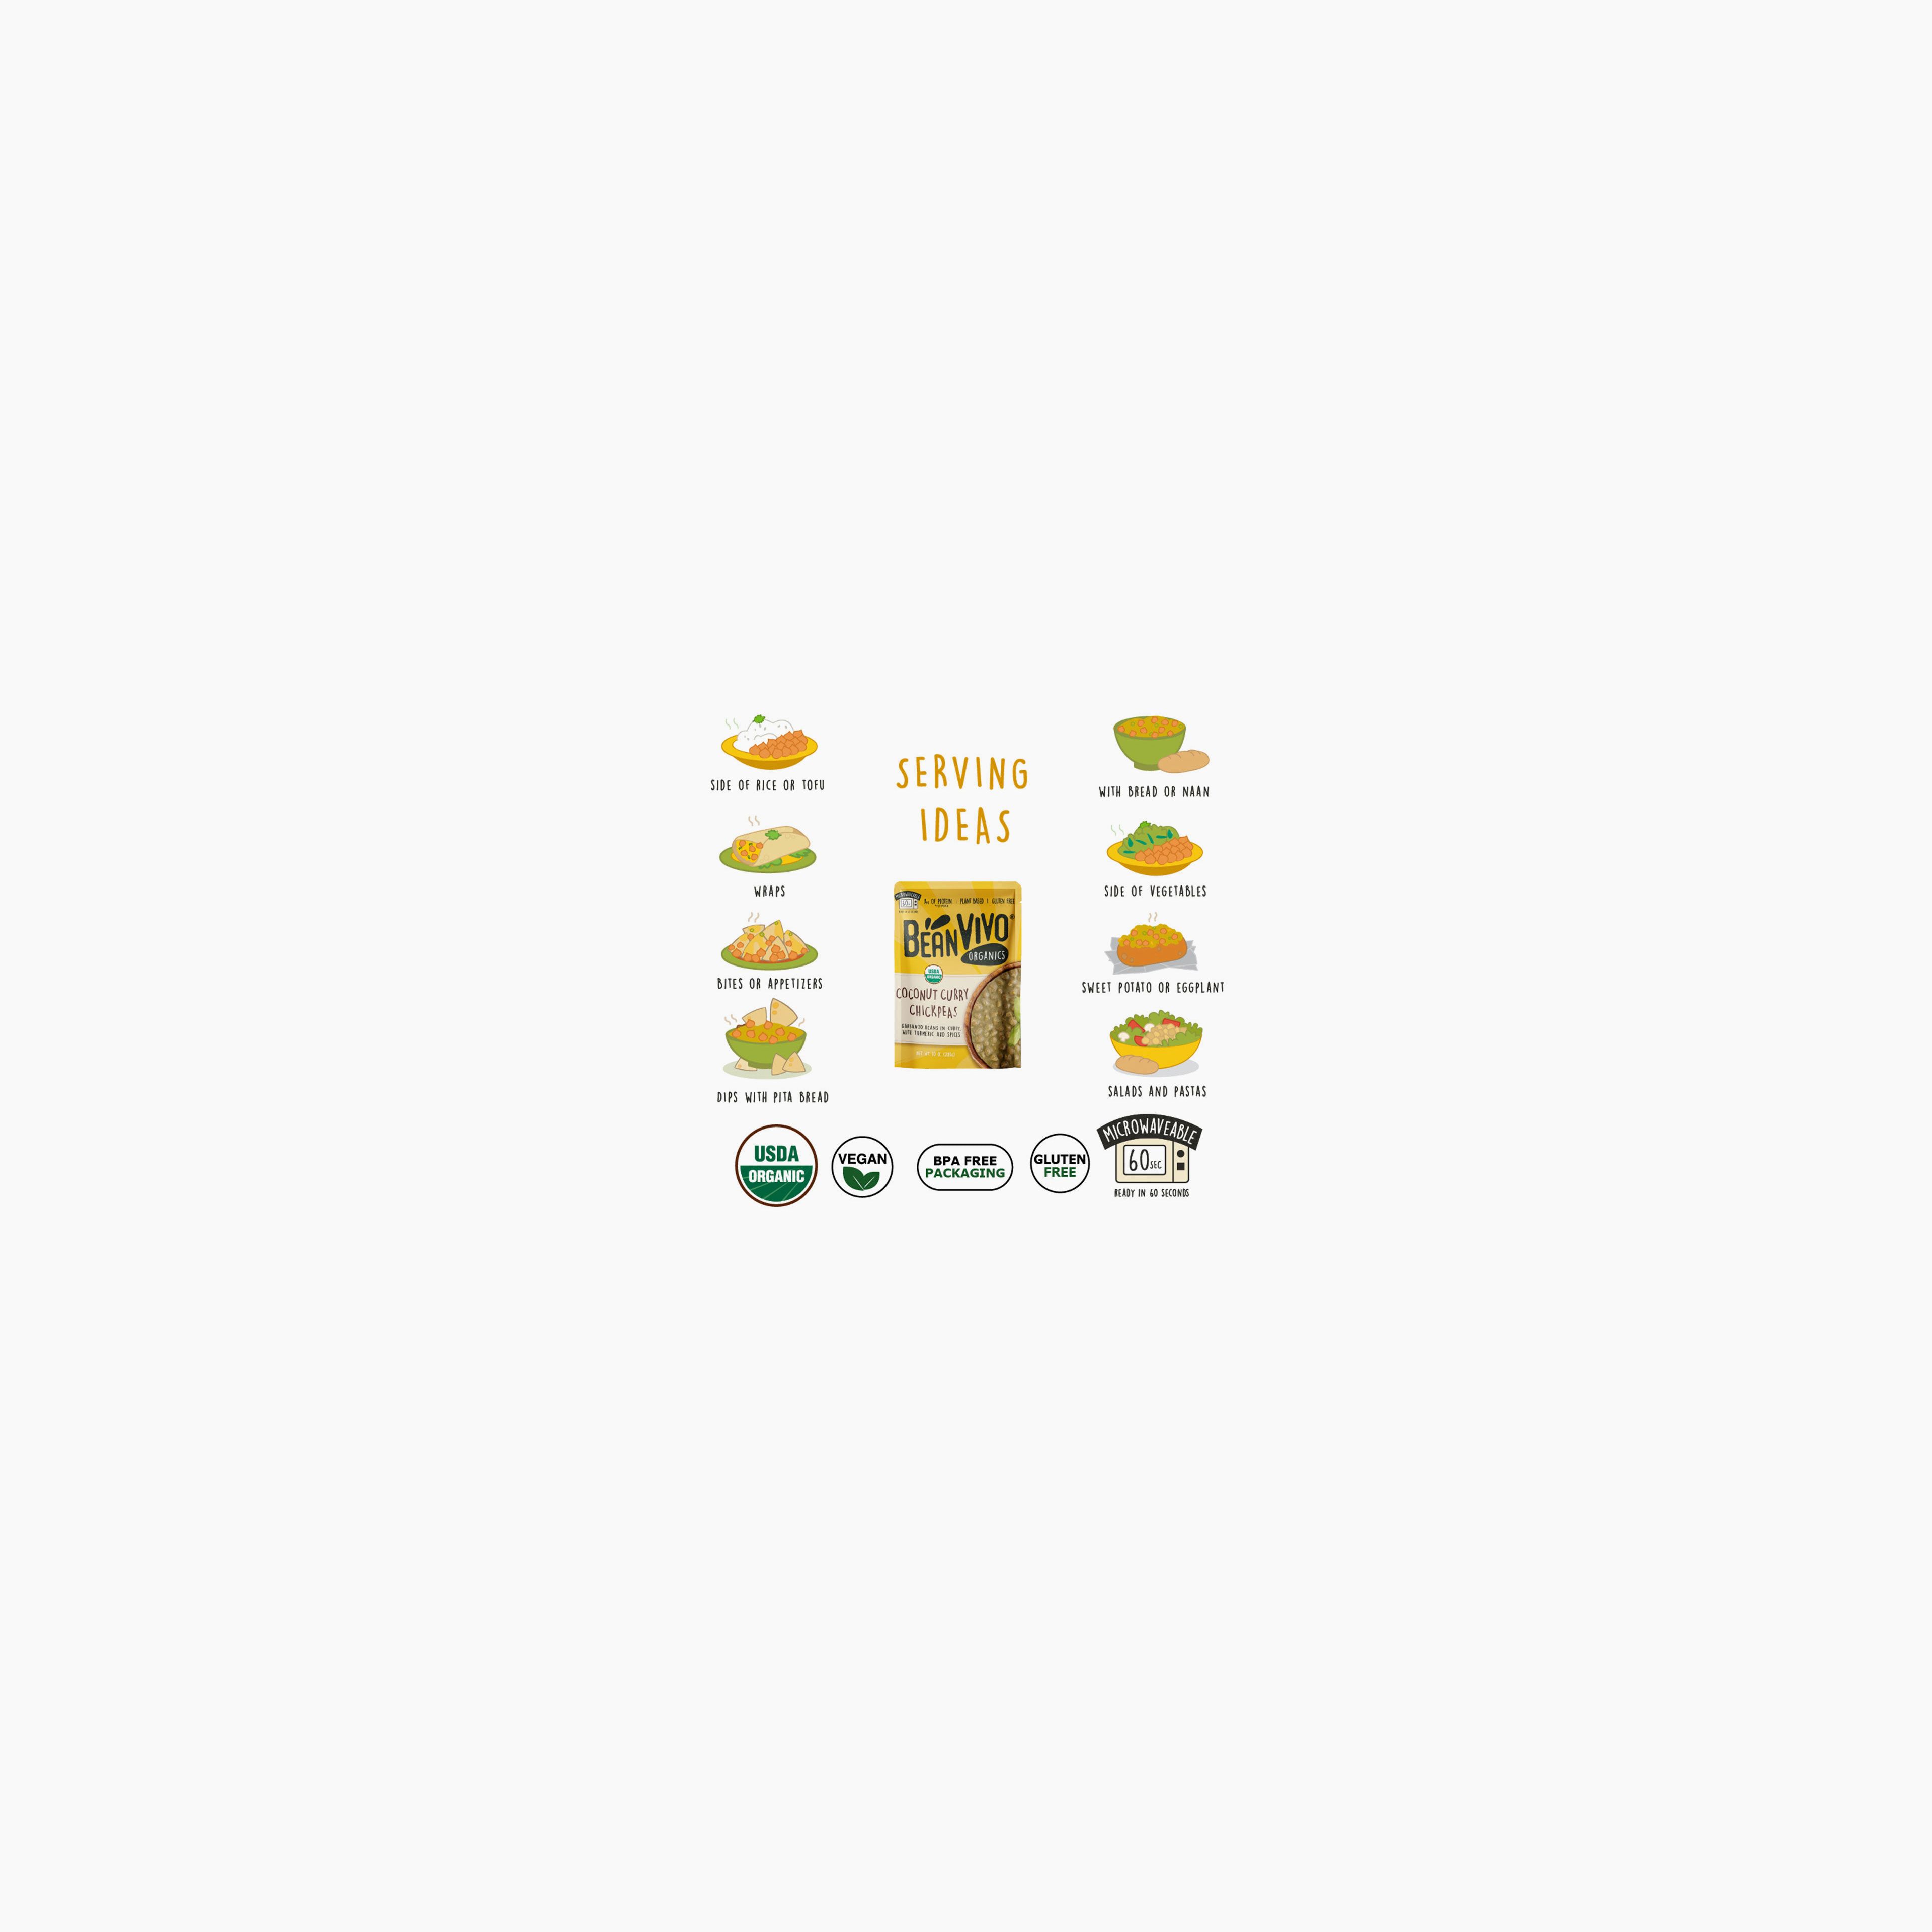 Organic Coconut Curry Chickpeas (6 pack)